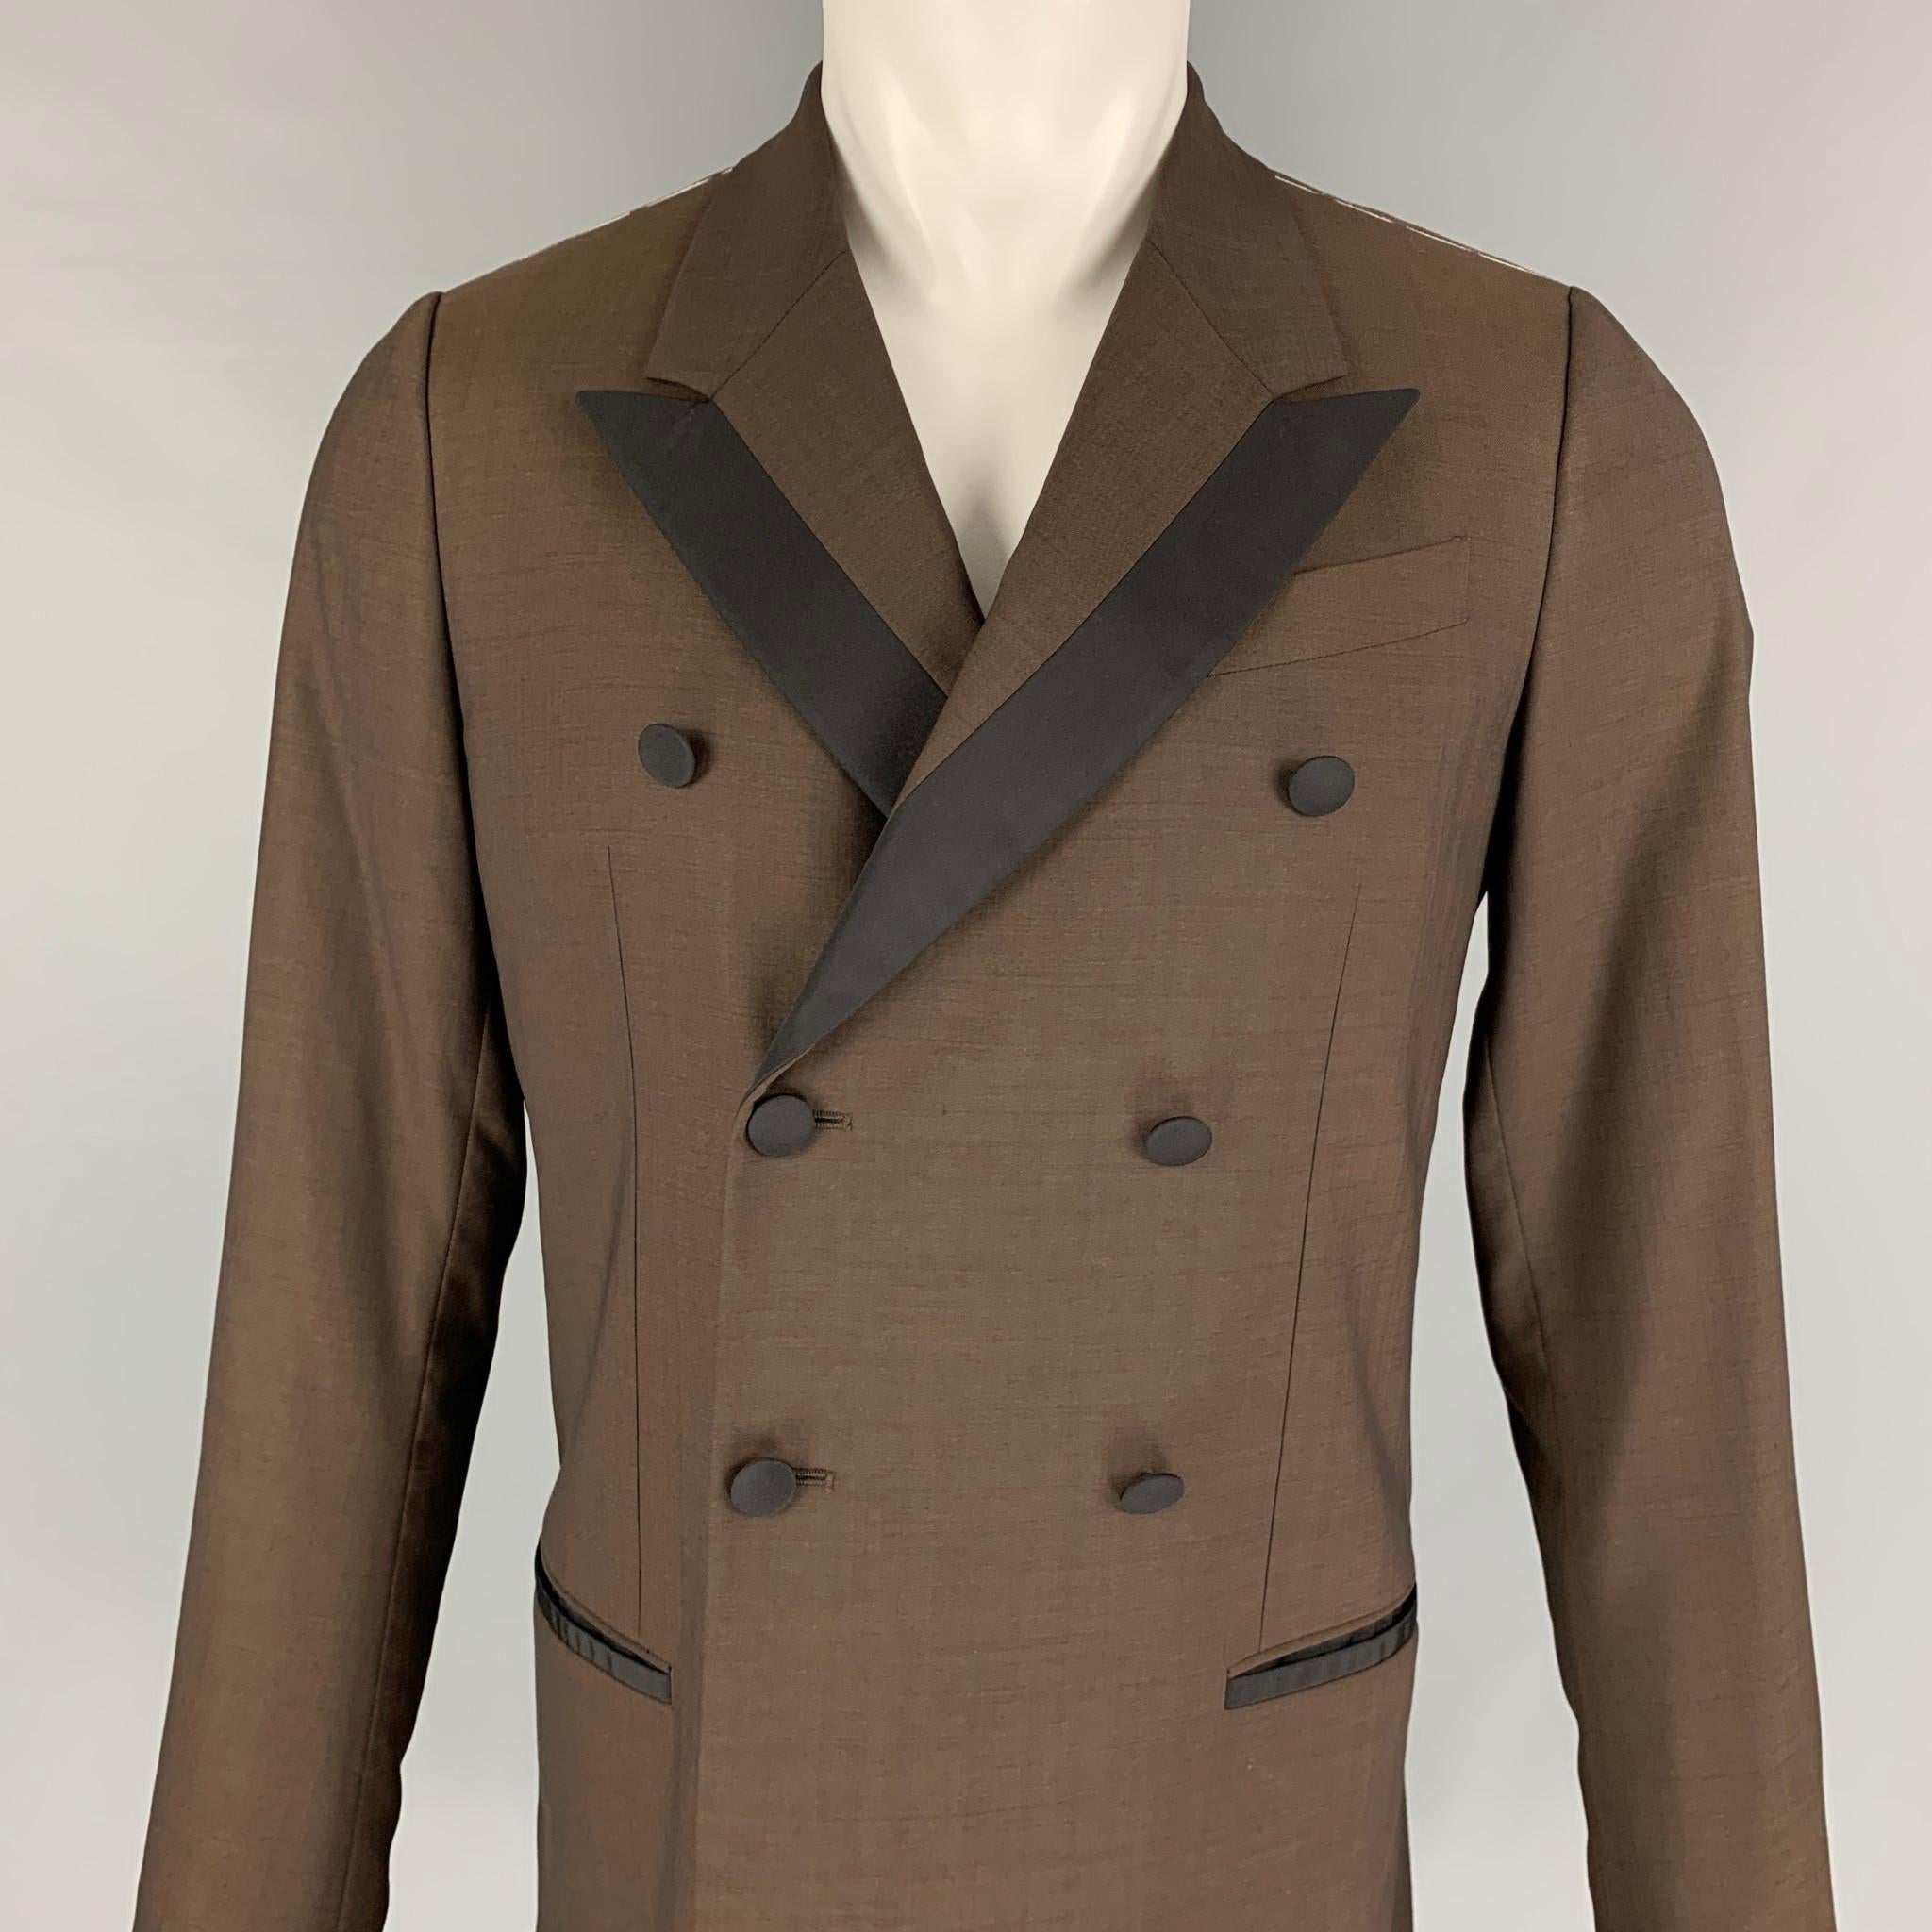 DOLCE & GABBANA coat comes in a brown & black wool blend with a full liner featuring a peak lapel, slit pockets, single back vent, and a double breasted closure. Made in Italy. 

Excellent Pre-Owned Condition.
Marked: 44

Measurements:

Shoulder: